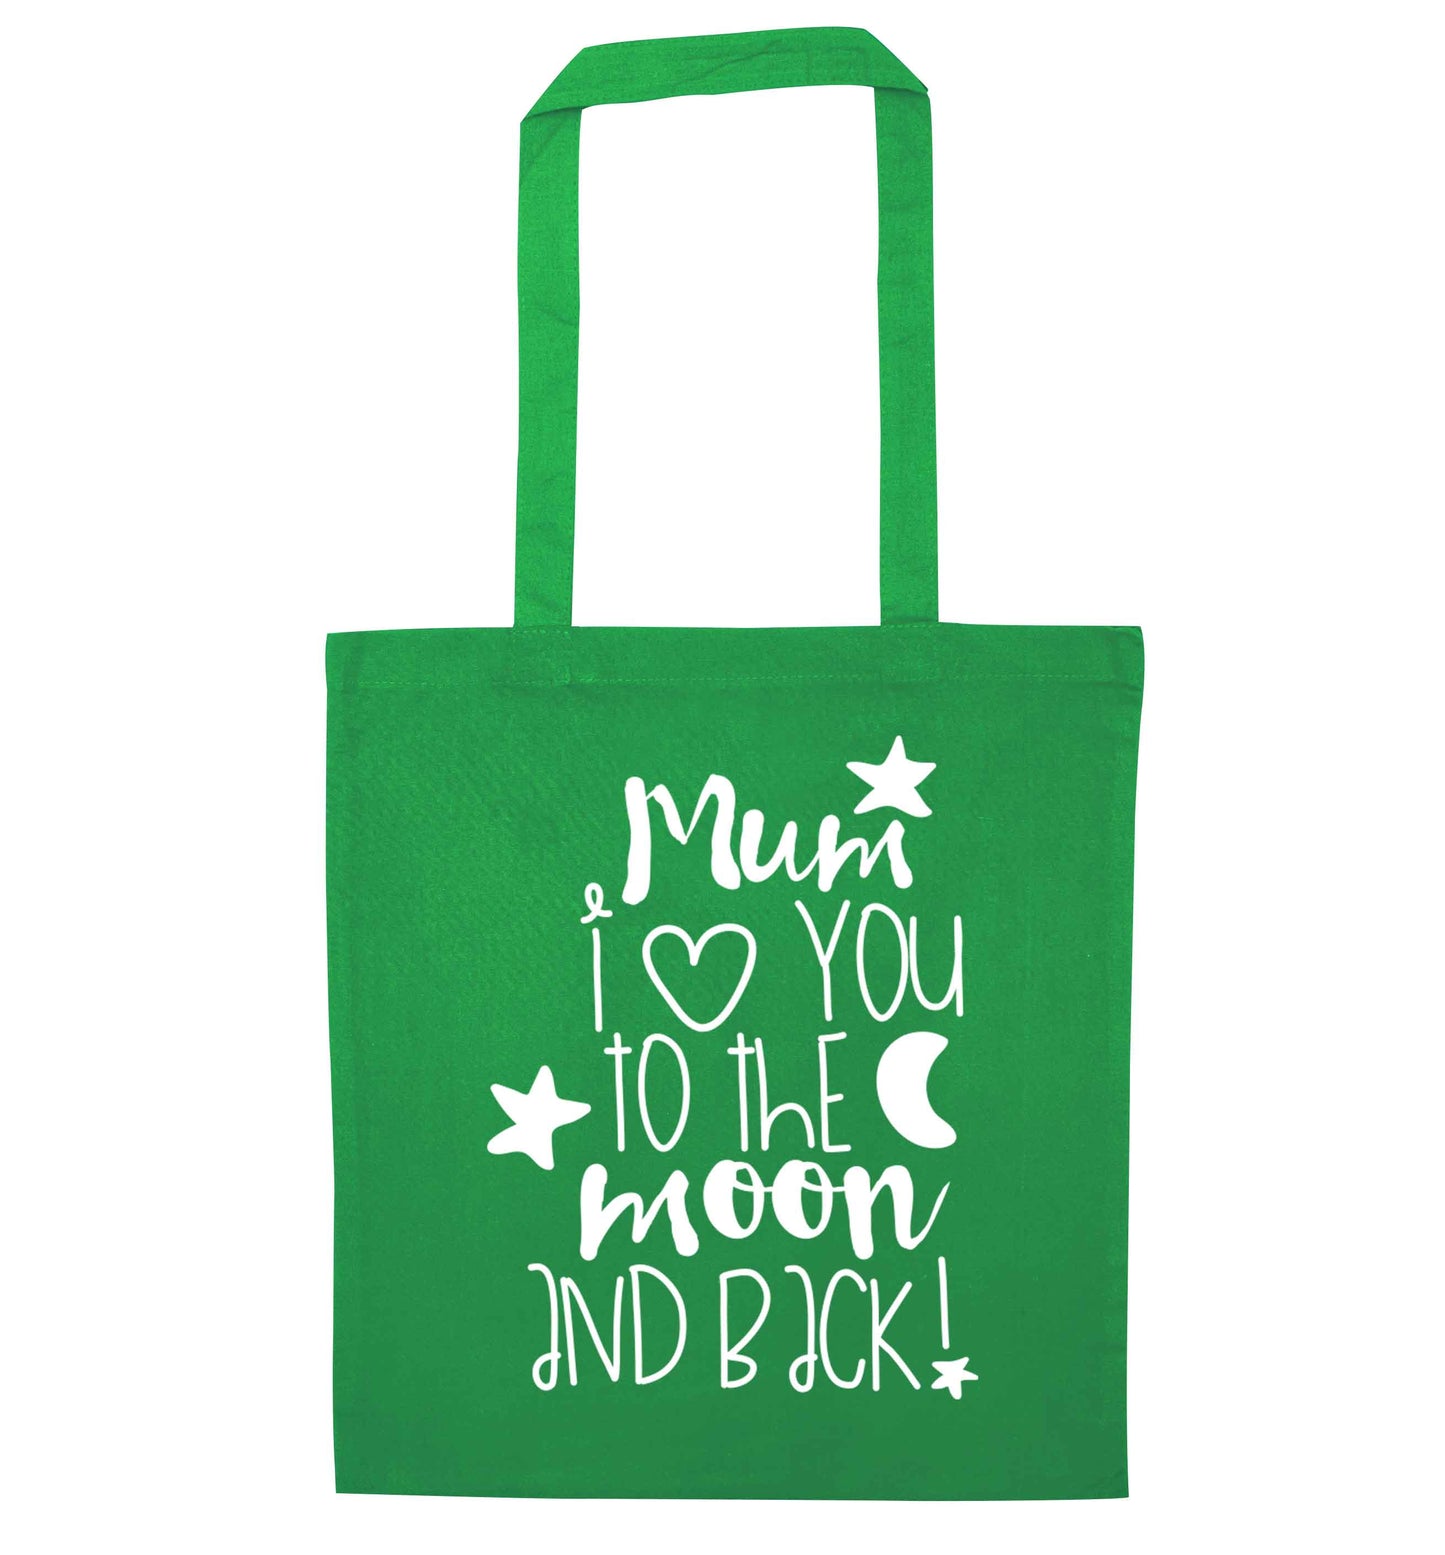 Mum I love you to the moon and back green tote bag